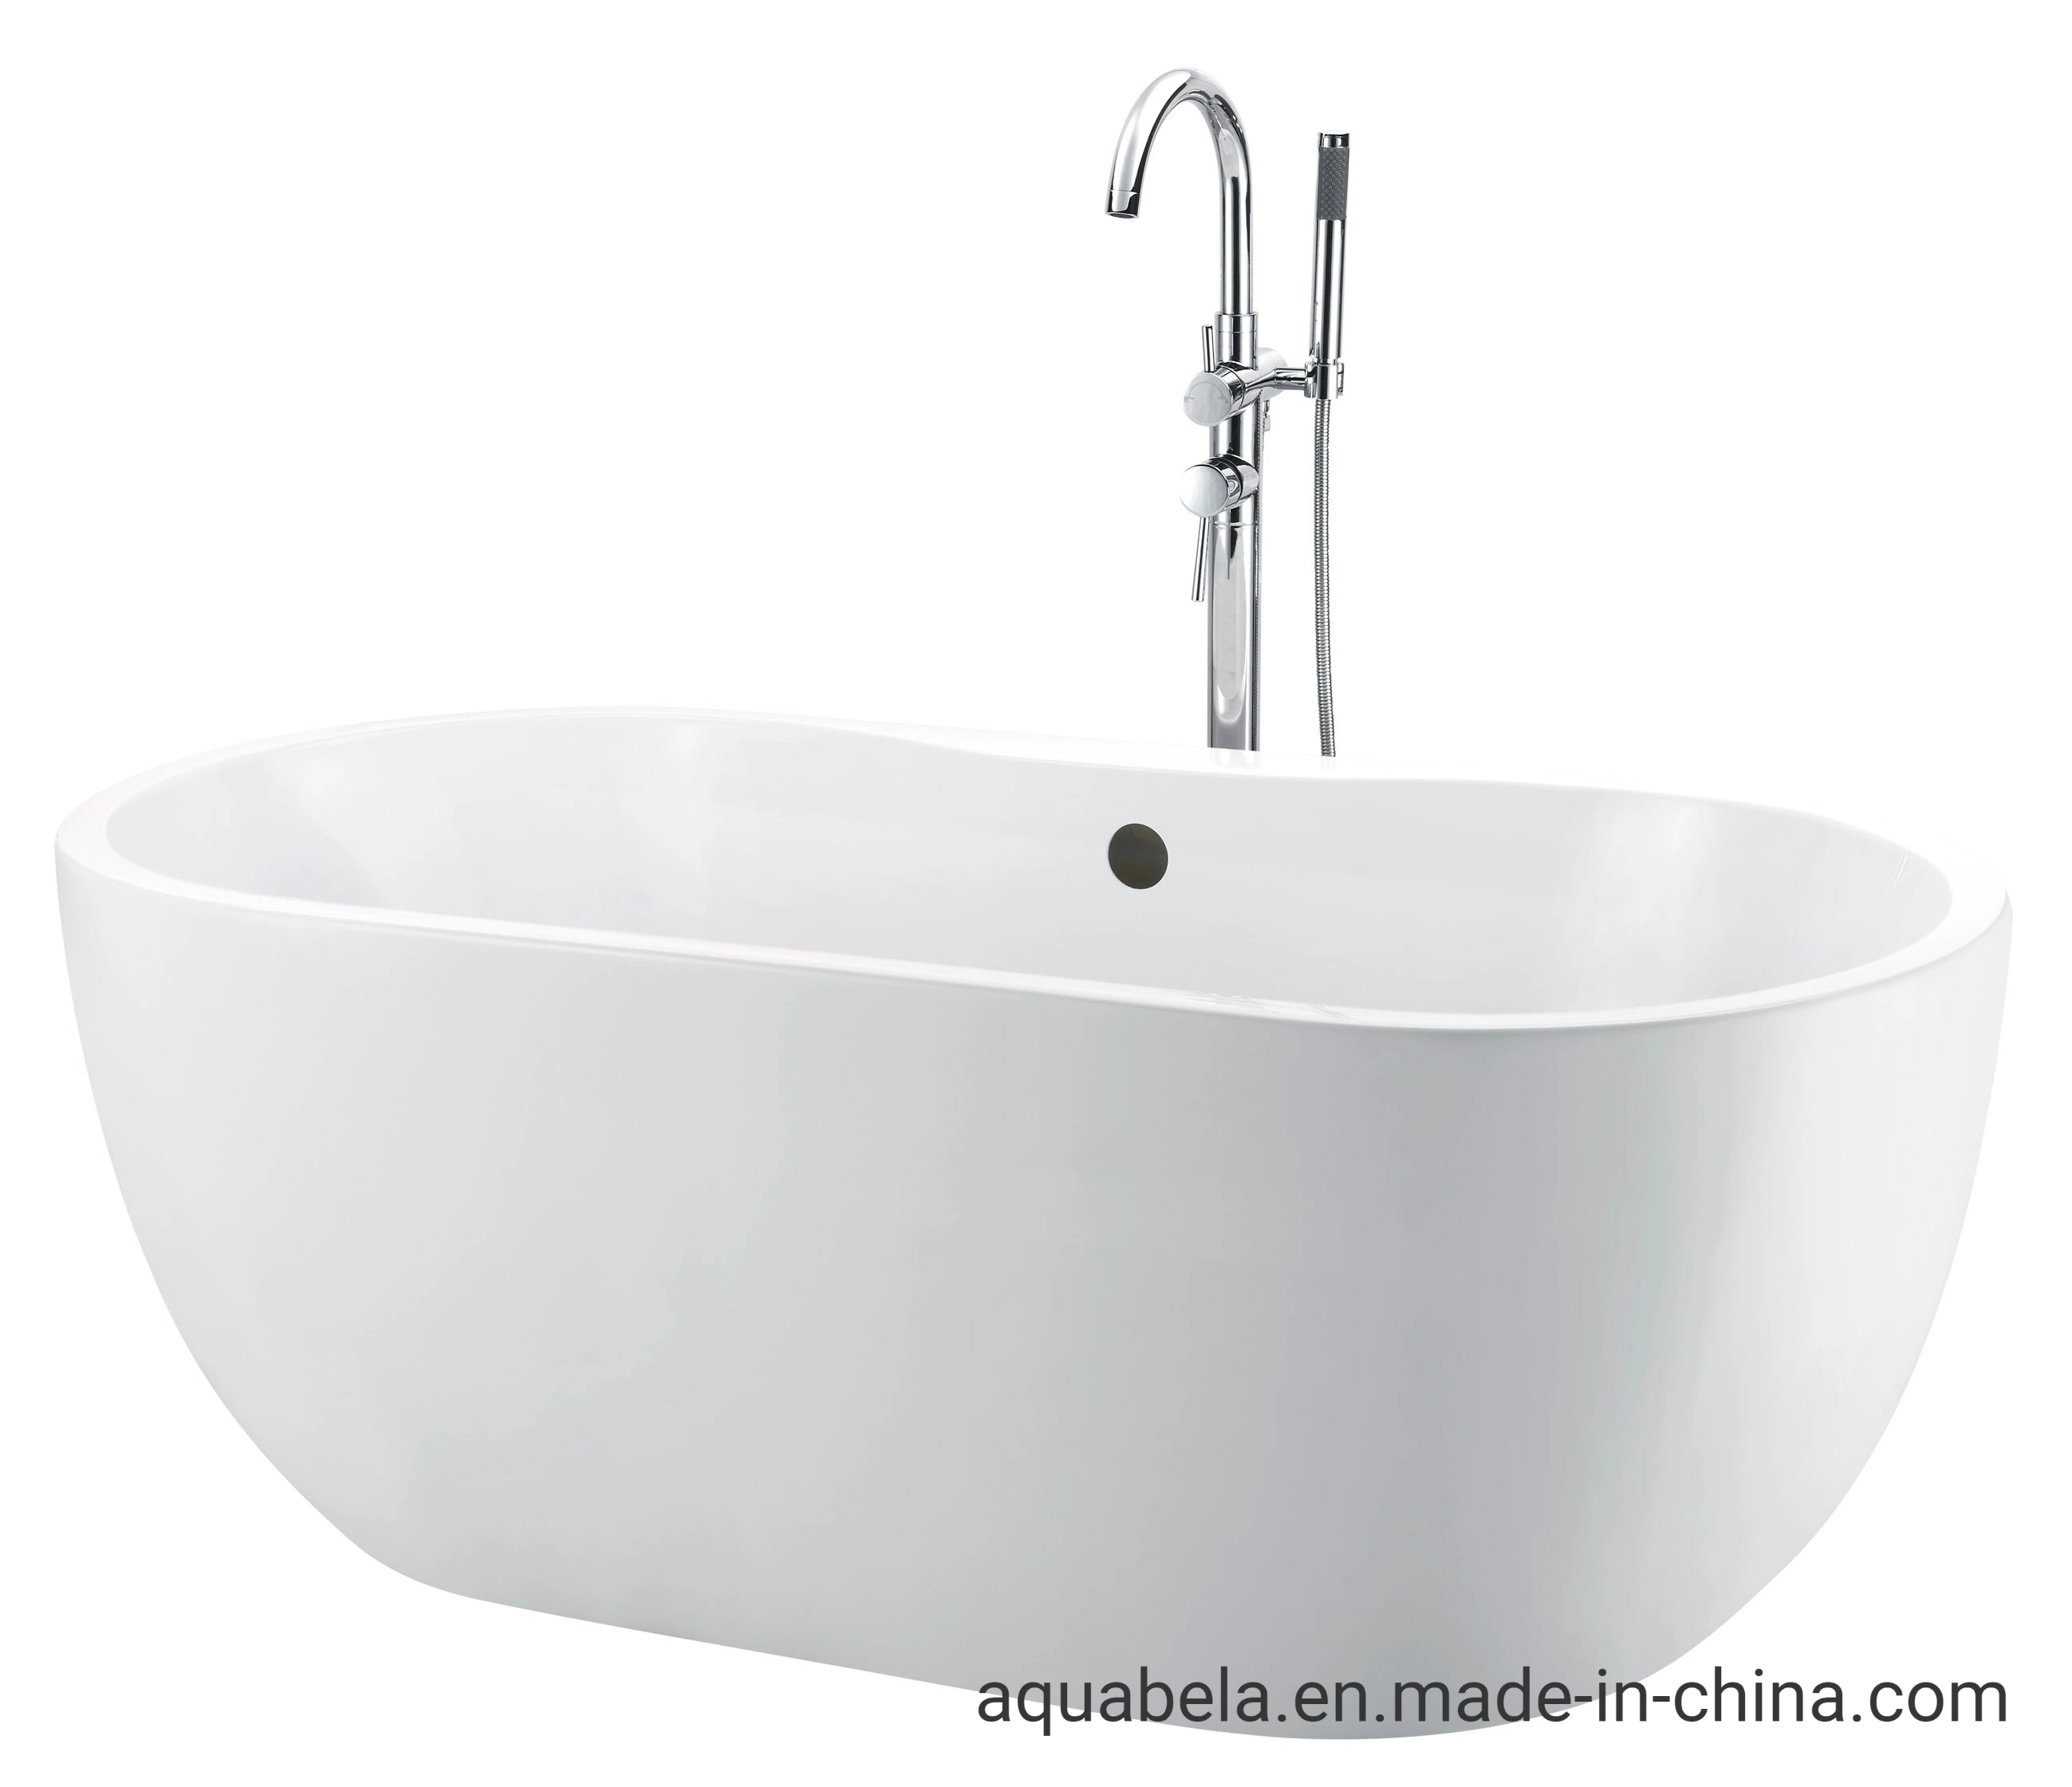 Wholesale/Supplier Modern Freestanding Acrylic Bathtub with Cupc and Ce Approval (JL658)